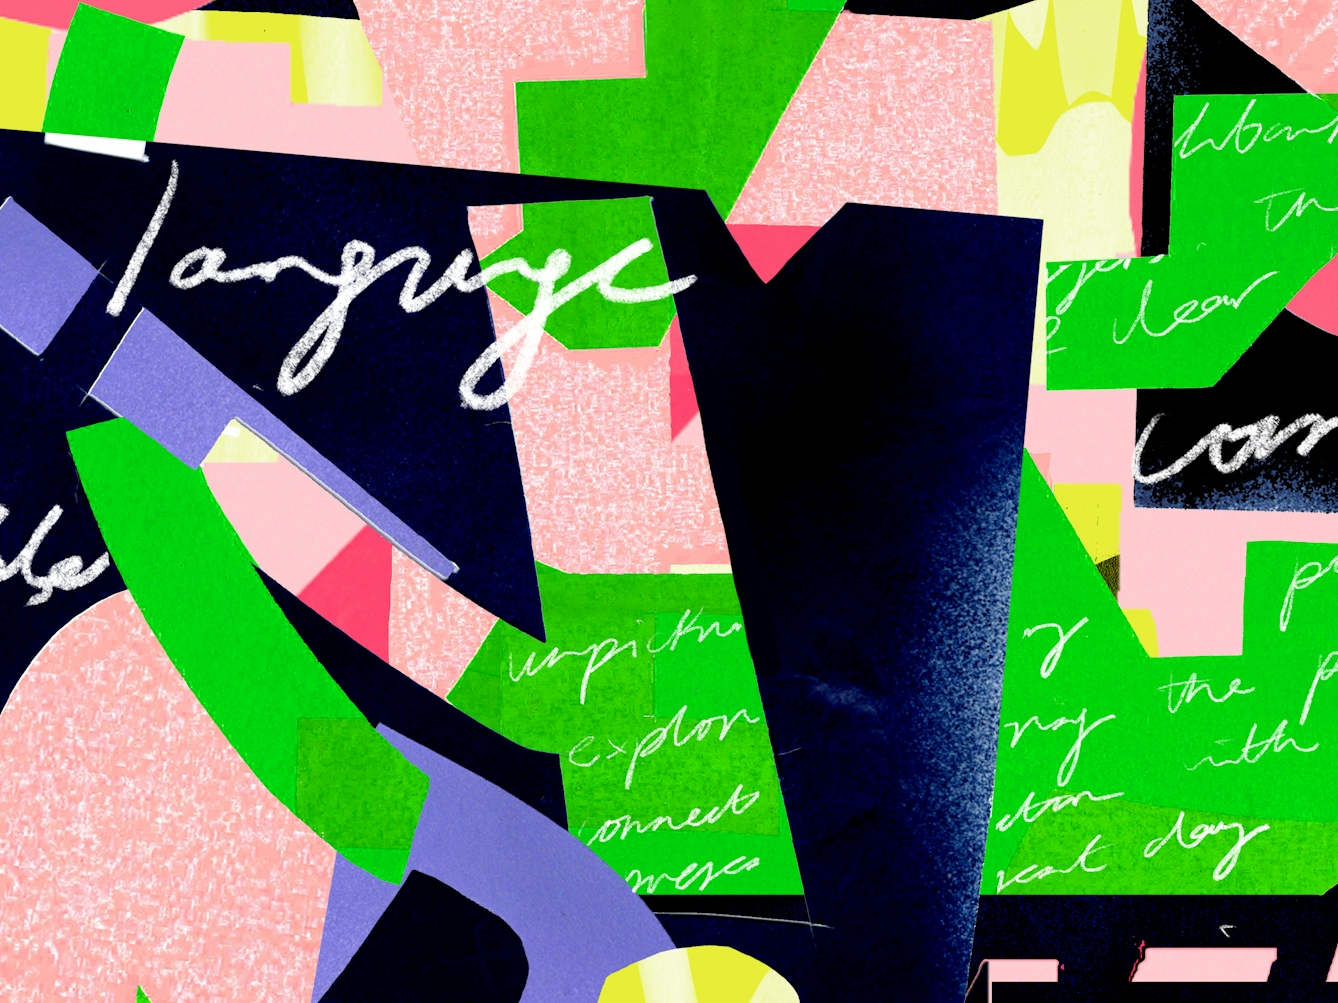 Detail from a larger colourful digital artwork created in a collage aesthetic. The artwork is made up of fragments of letters, geometric shapes and snippets of handwritten, joined up text. The hues are pinks, greens, purples and yellows, set against a dark black and blue background. The letters are sometimes the right way up and sometimes at an angle. Other graphic elements overlap them, obscuring parts. The handwritten text is not easy to read, but some words push through, like 'language'. The overall feel is of graphic fragmentation with communication at its centre.